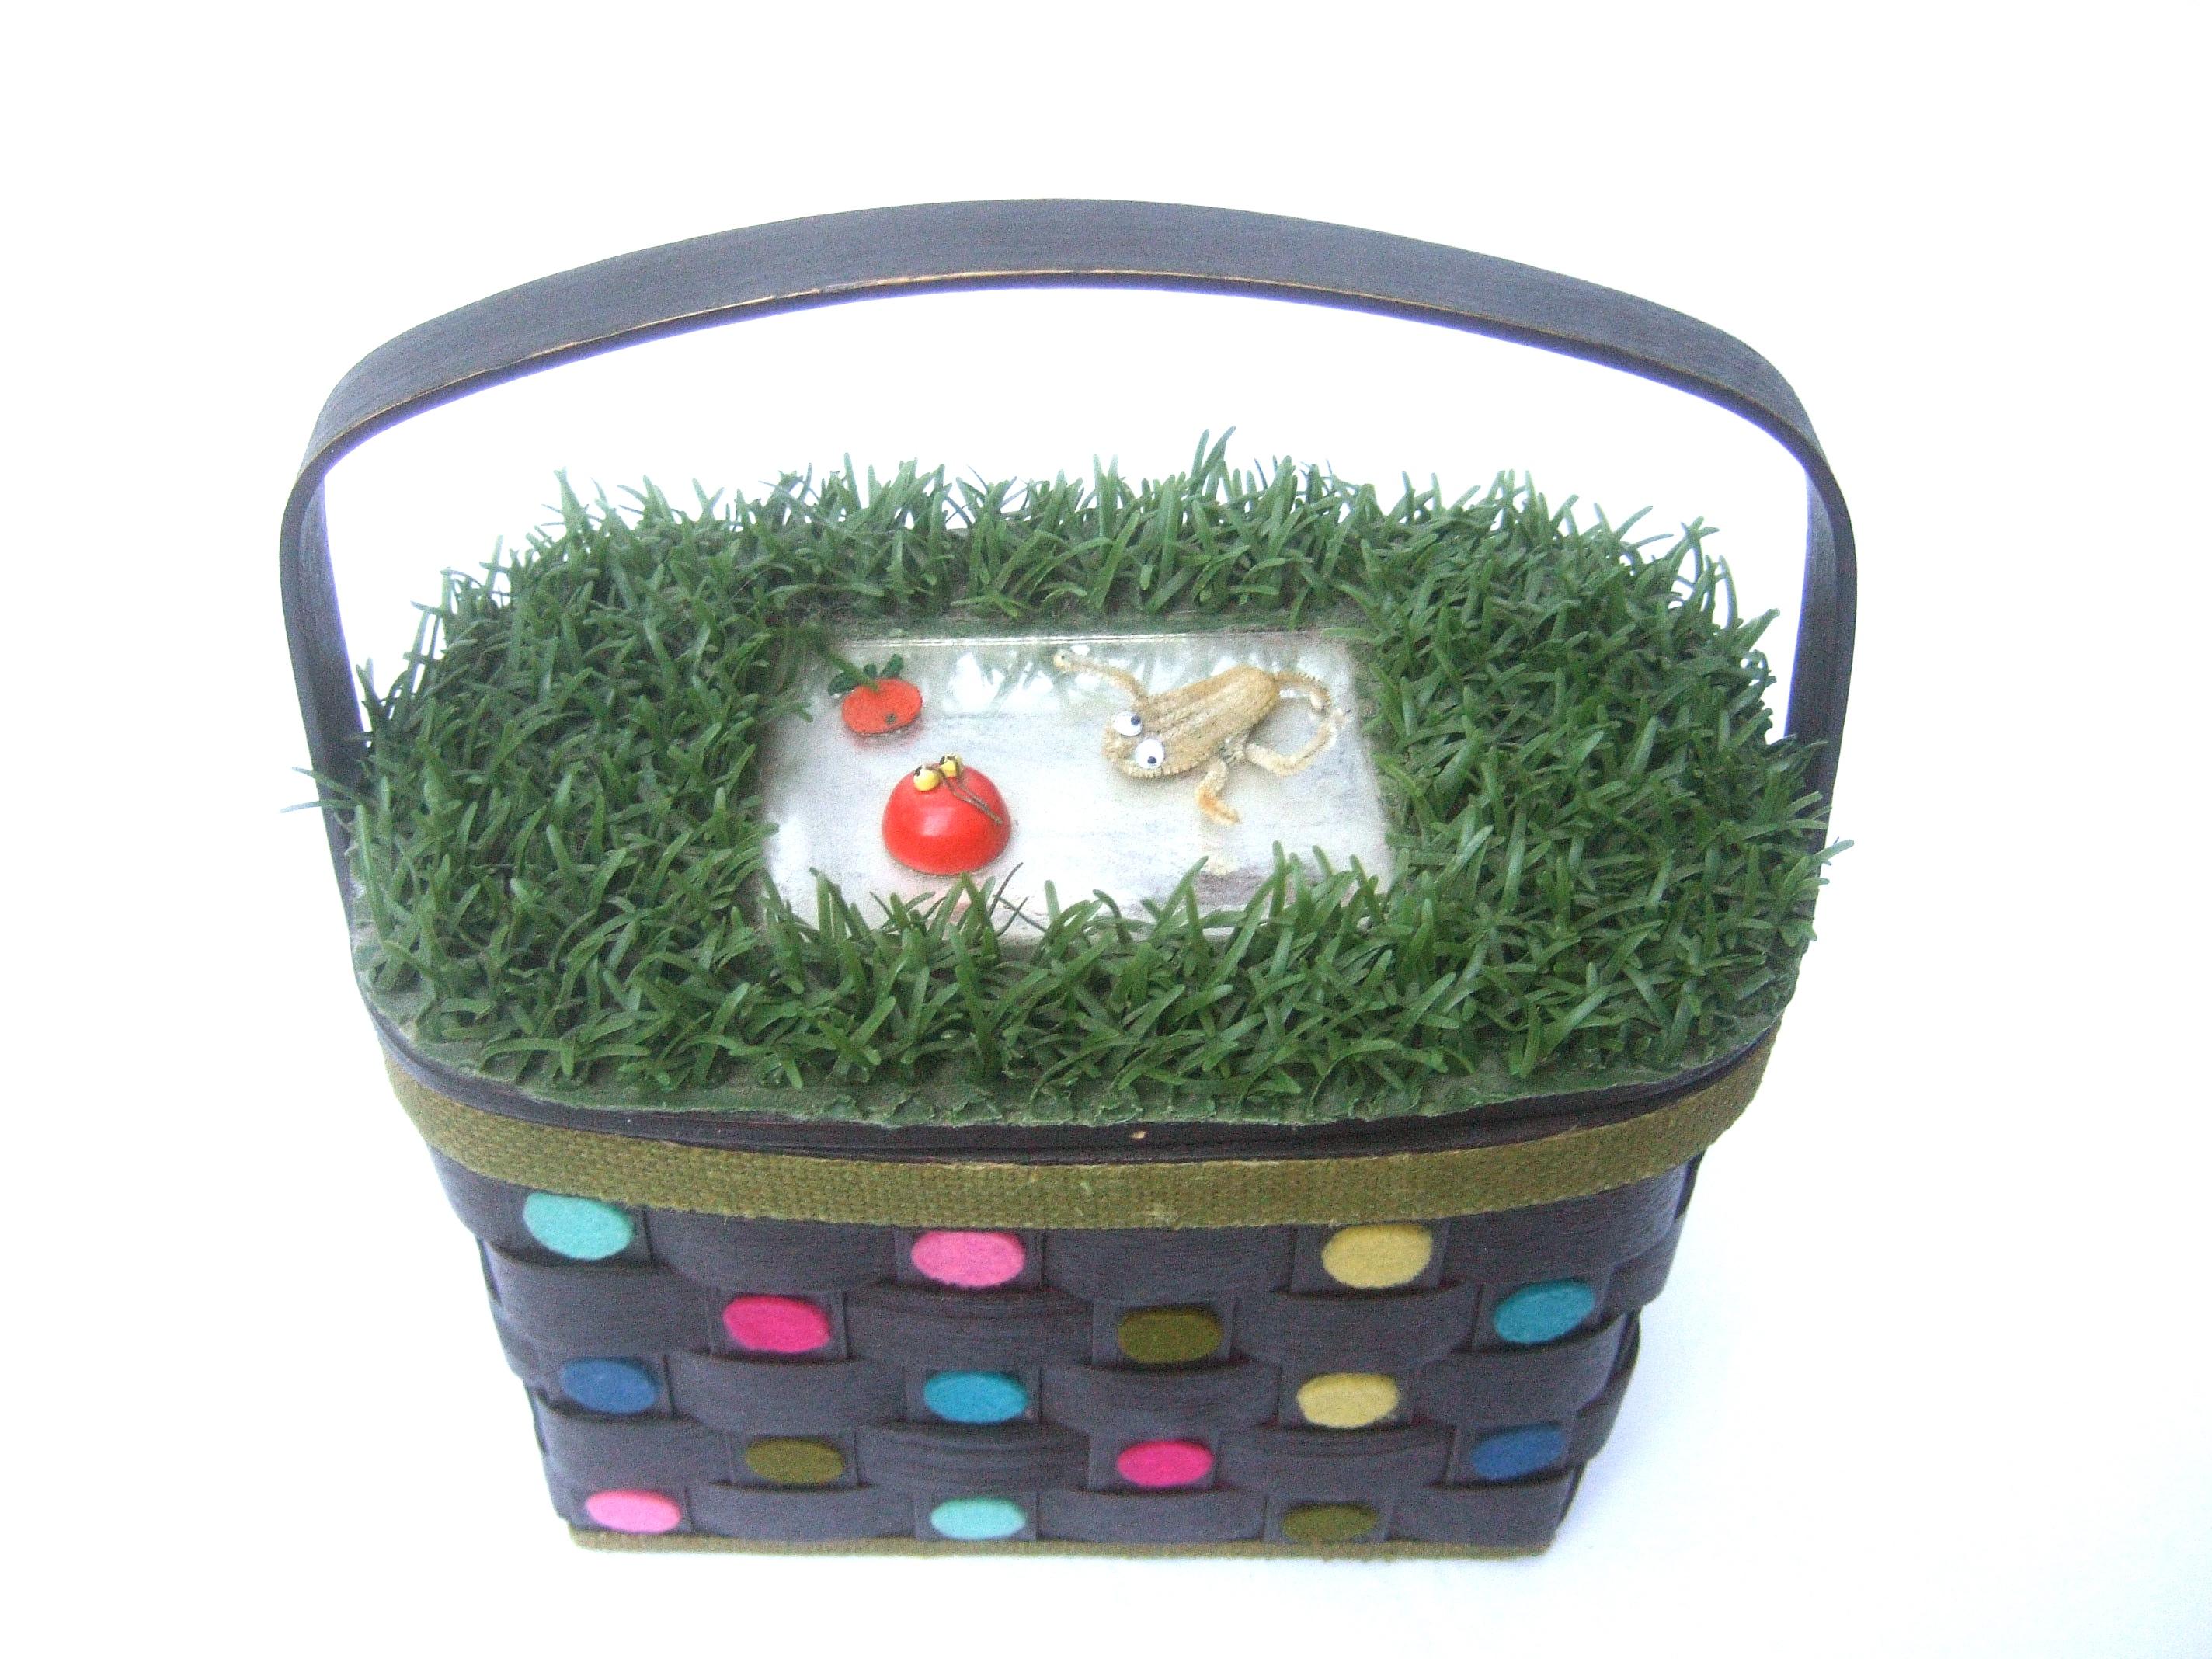 Whimsical Quirky Astro Turf  Wicker Handmade Basket Purse circa 1970 For Sale 2